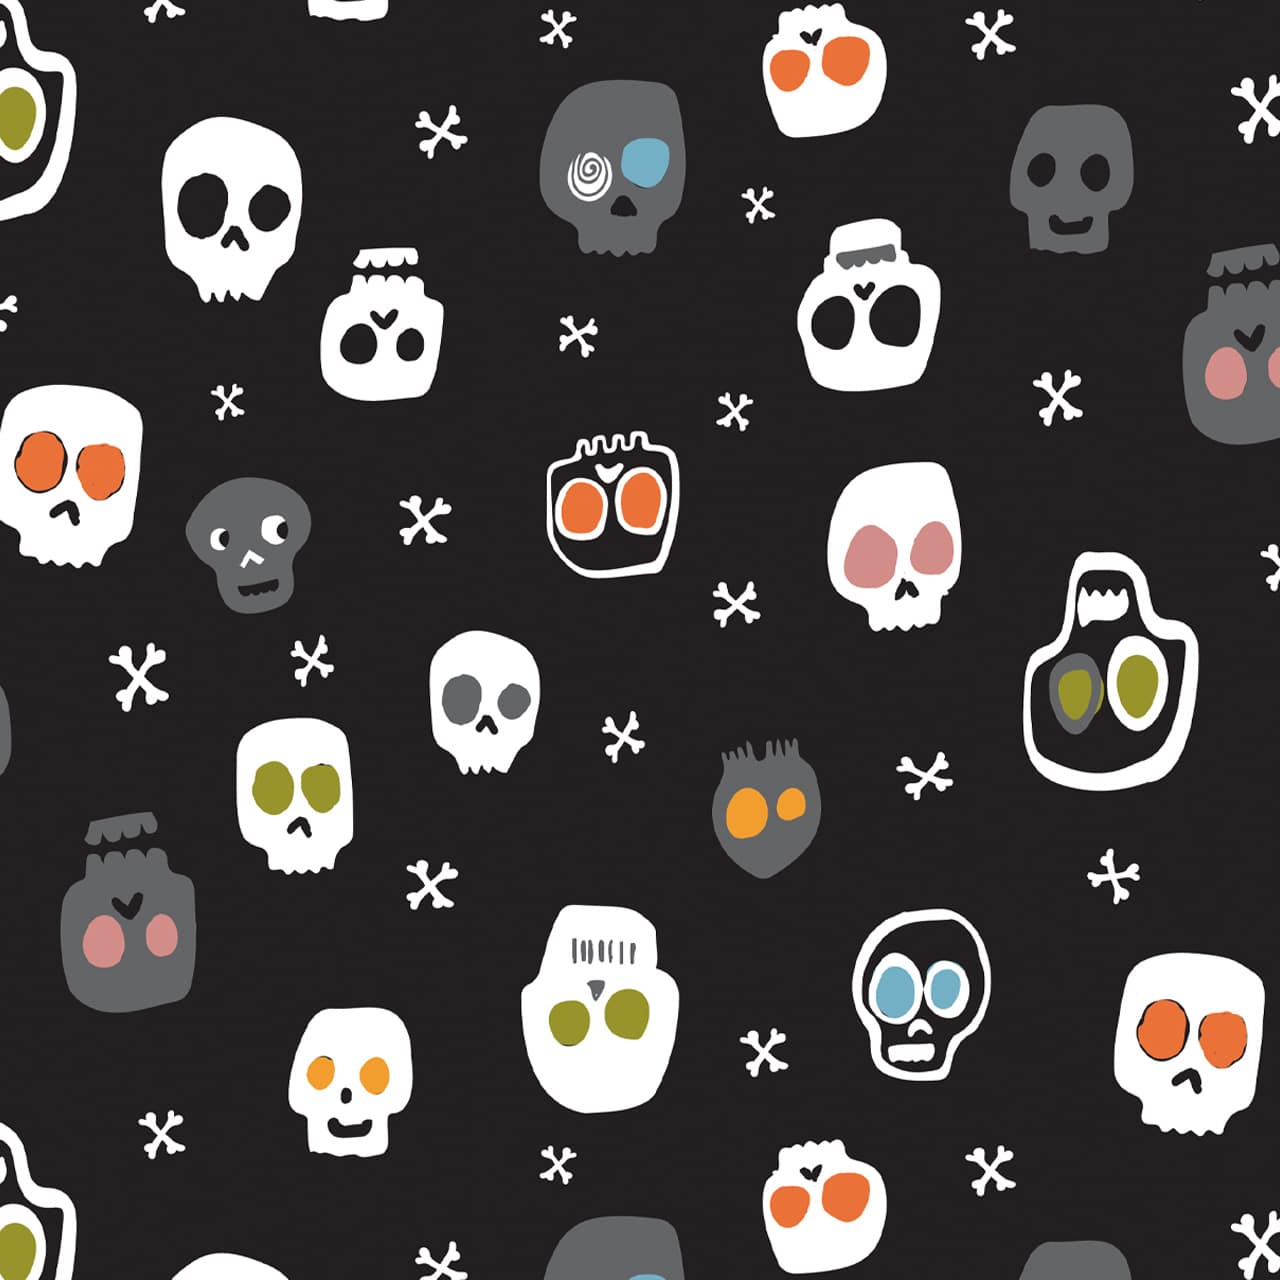 Trick or Treat Fabric Collection - Stephanie Thannhauser - Dashwood Studios